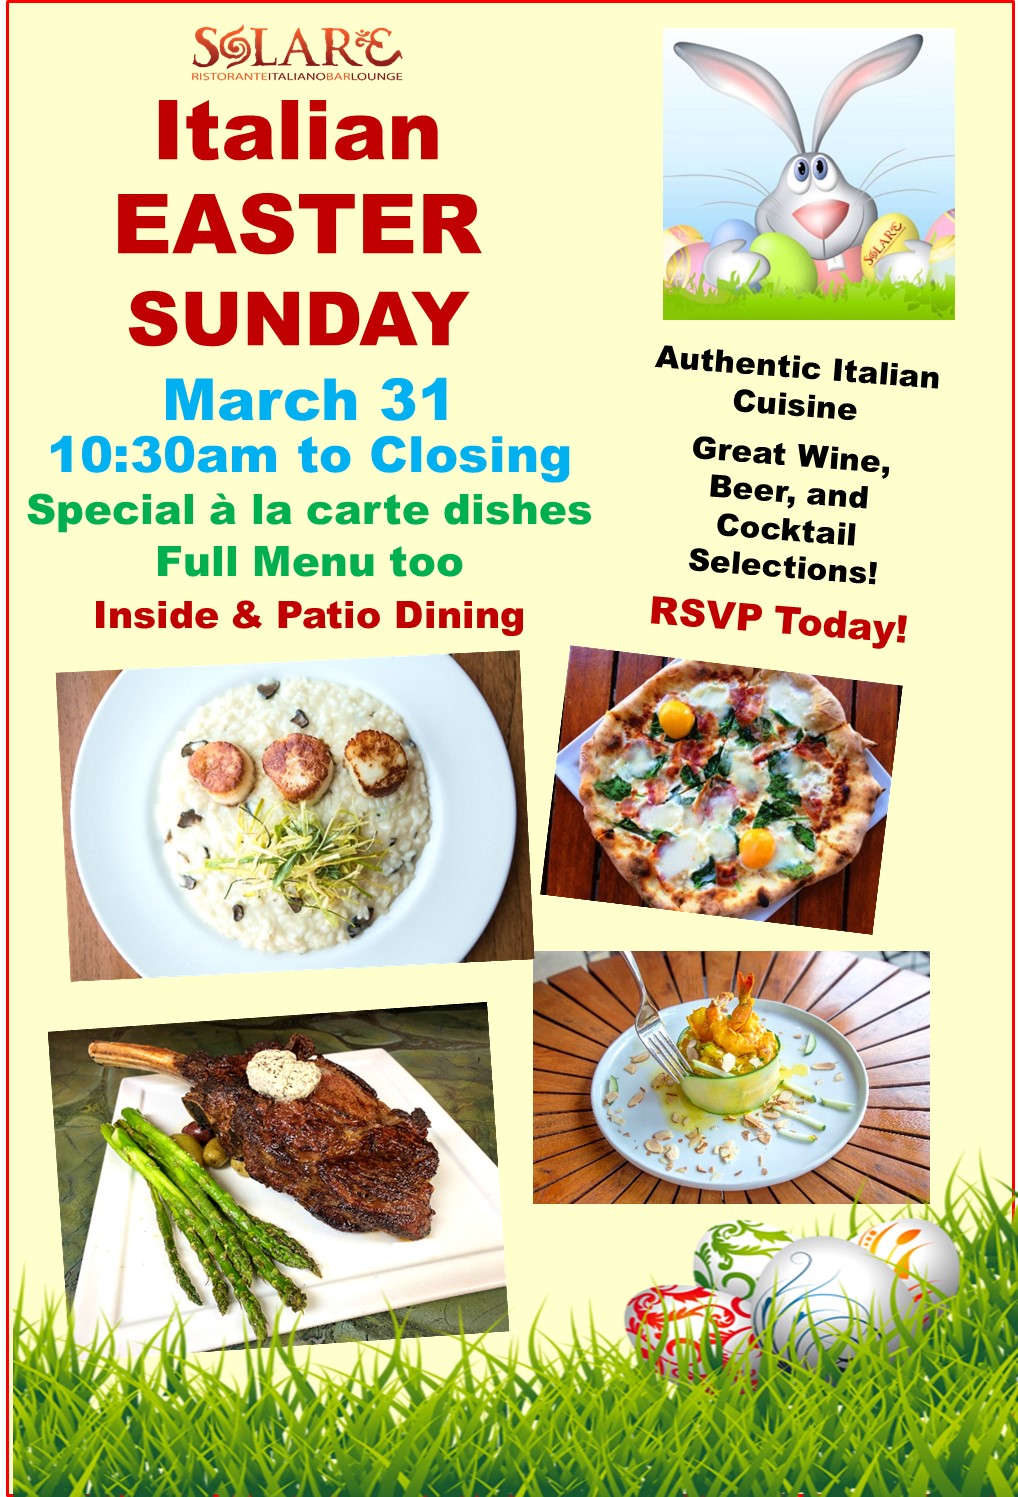 <a id="Solare-Easter-Sunday"></a>Easter Sunday at Solare